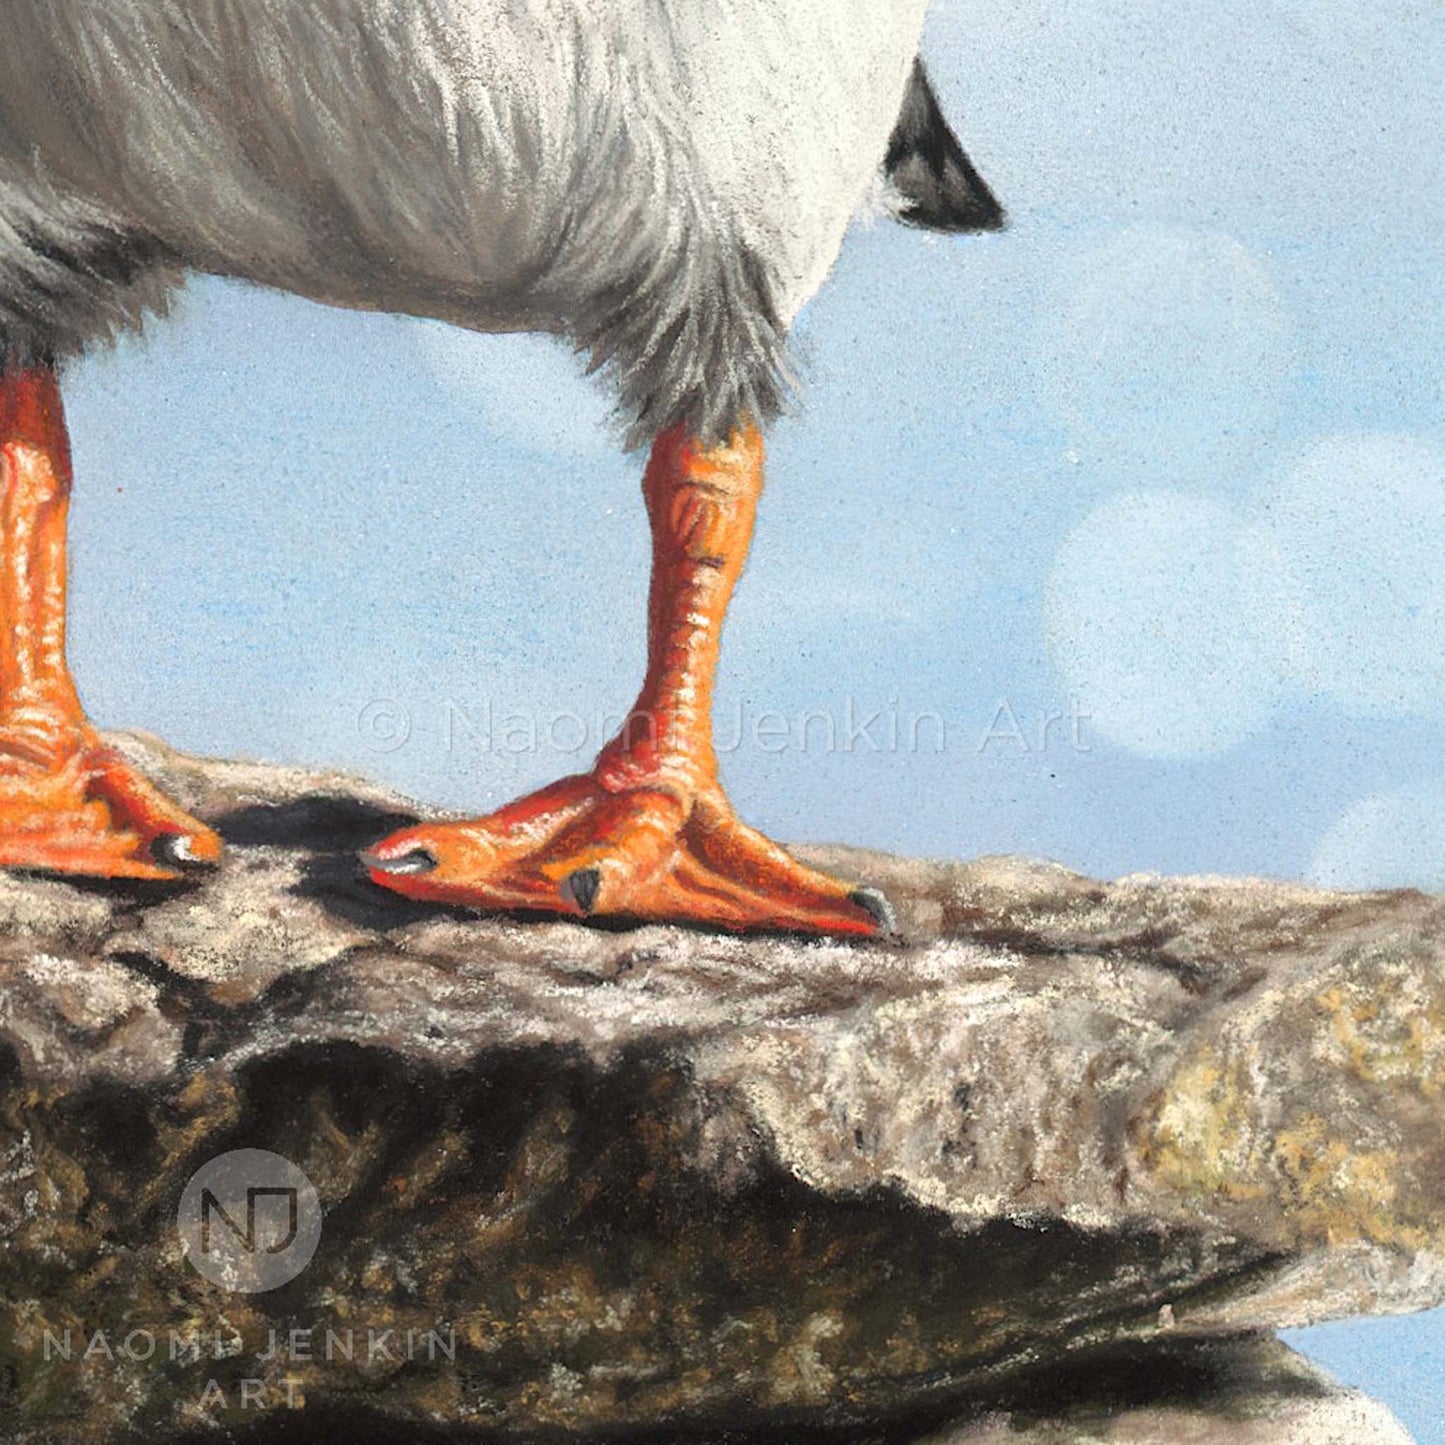 Close up puffin feet from the original painting 'Puffins' by Naomi Jenkin